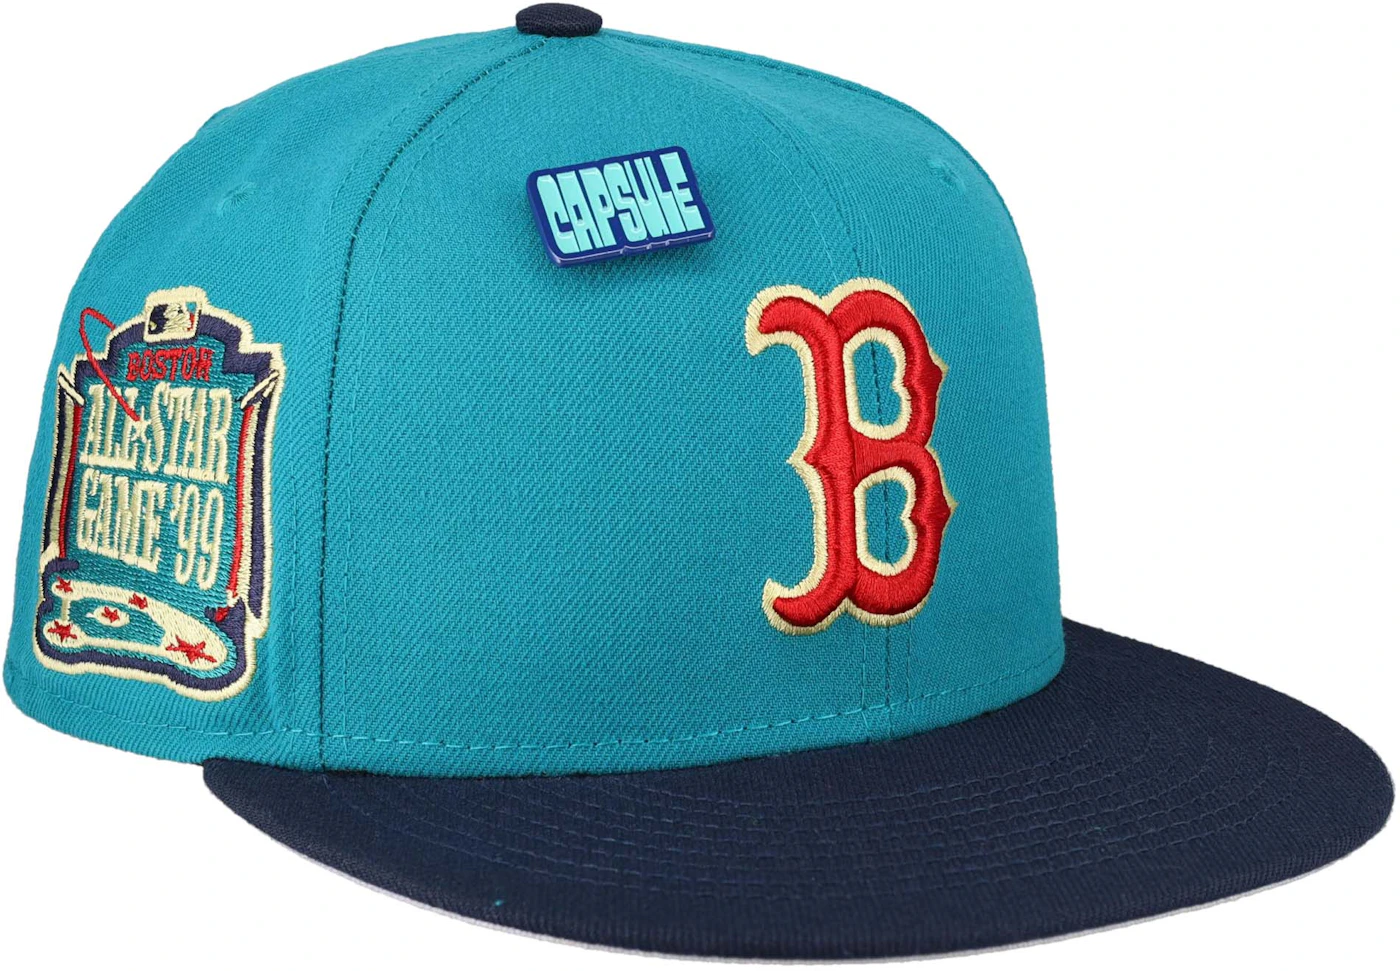 New Era Boston Red Sox Fenway Park 100 Years City of Champions Two Tone  Edition 59Fifty Fitted Hat, EXCLUSIVE HATS, CAPS